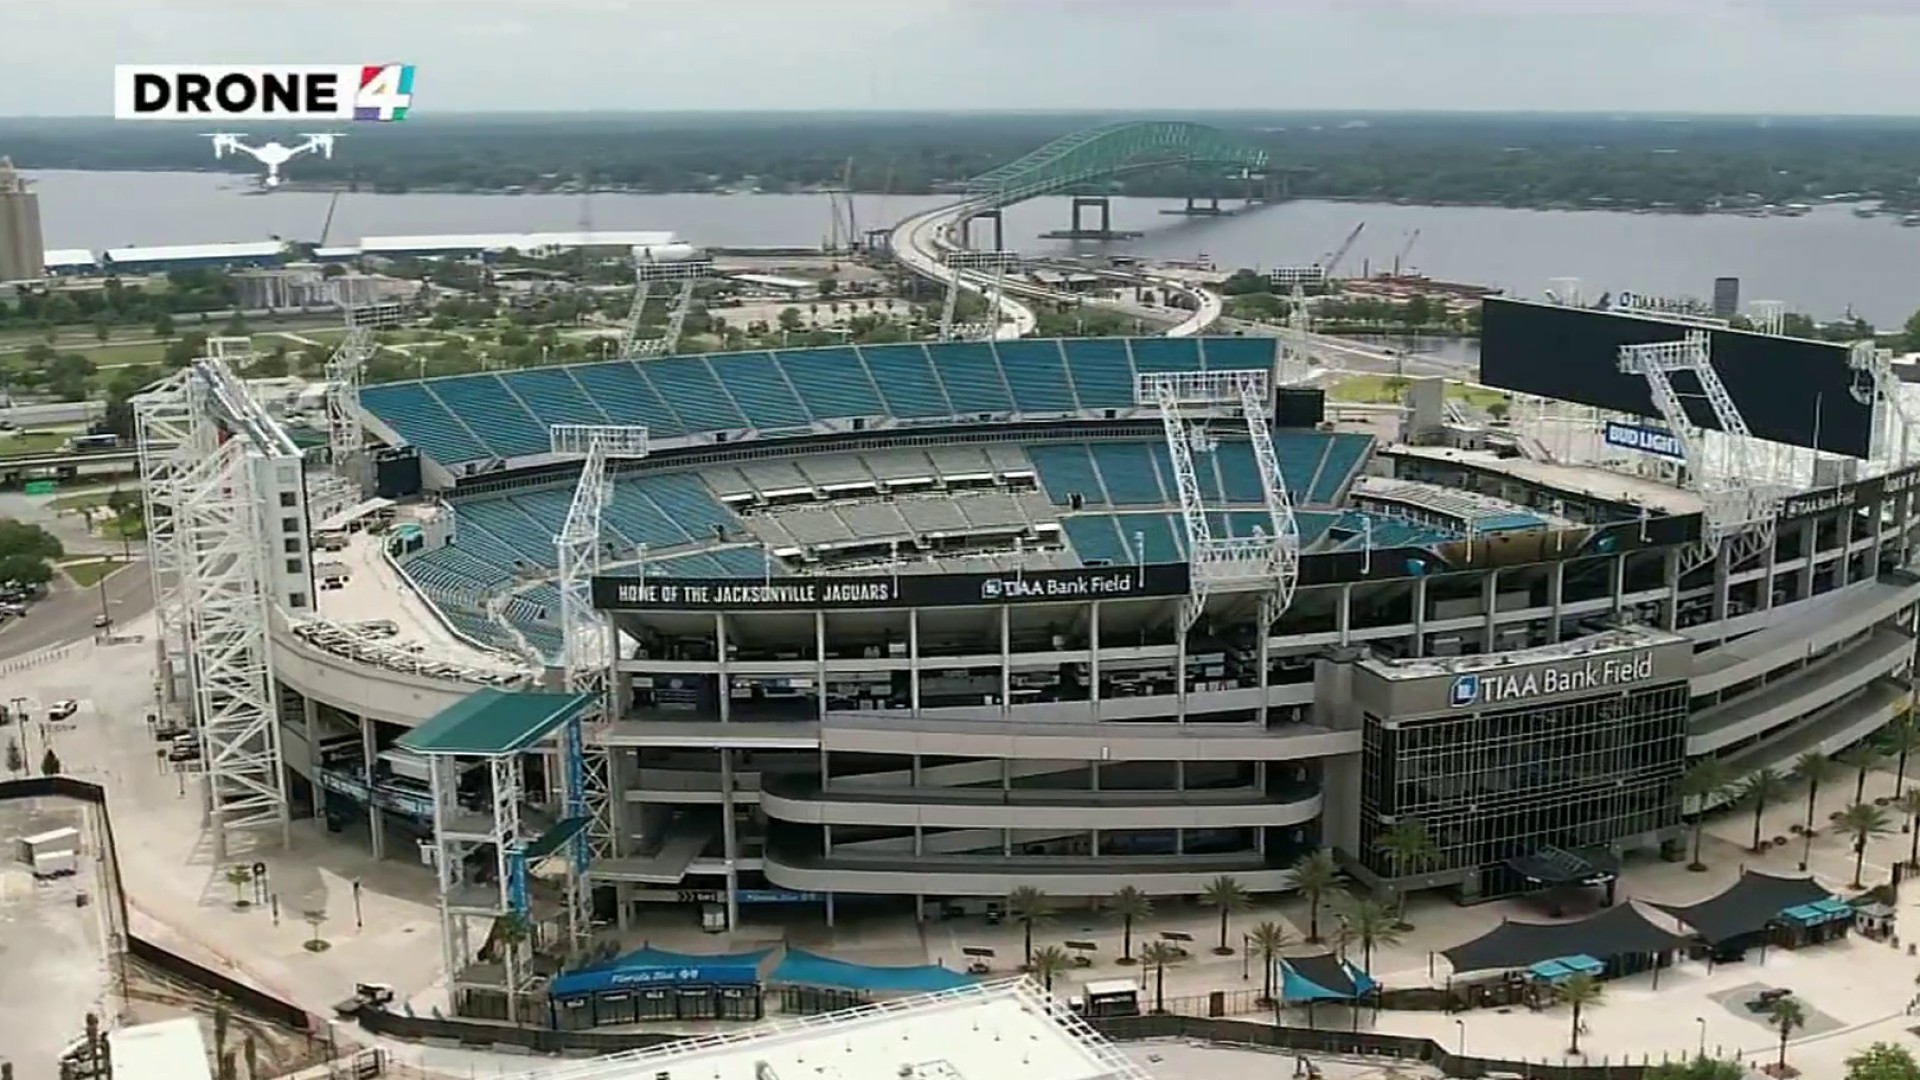 Mayoral candidates speak out on possibility of Jaguars playing outside city  during stadium renovations